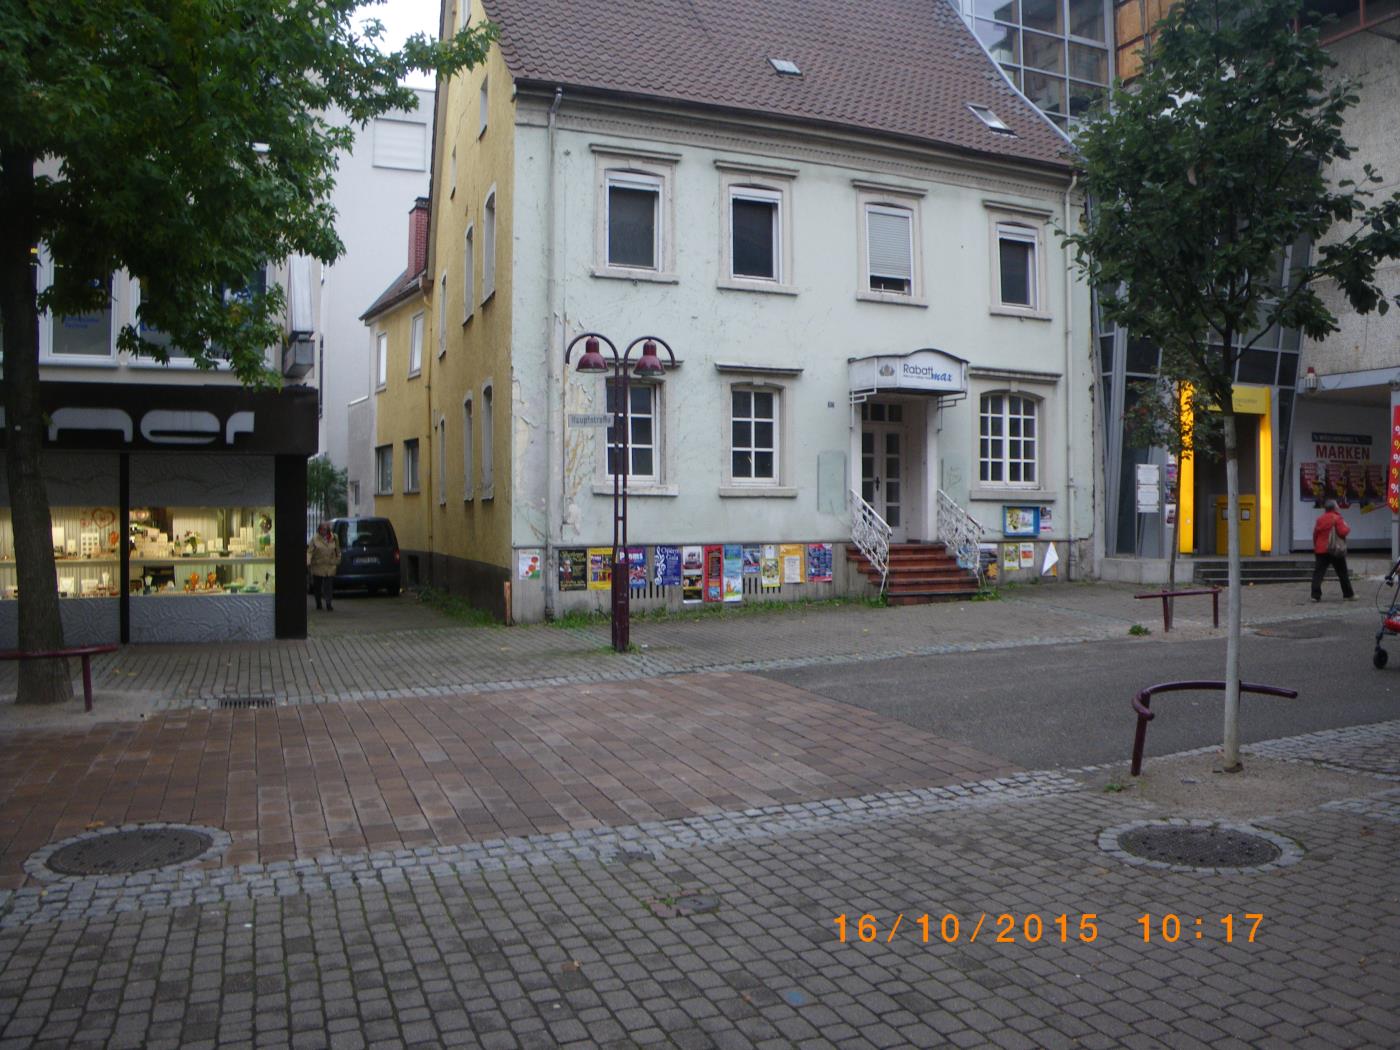 No Jehovah's Witnesses in Wiesloch